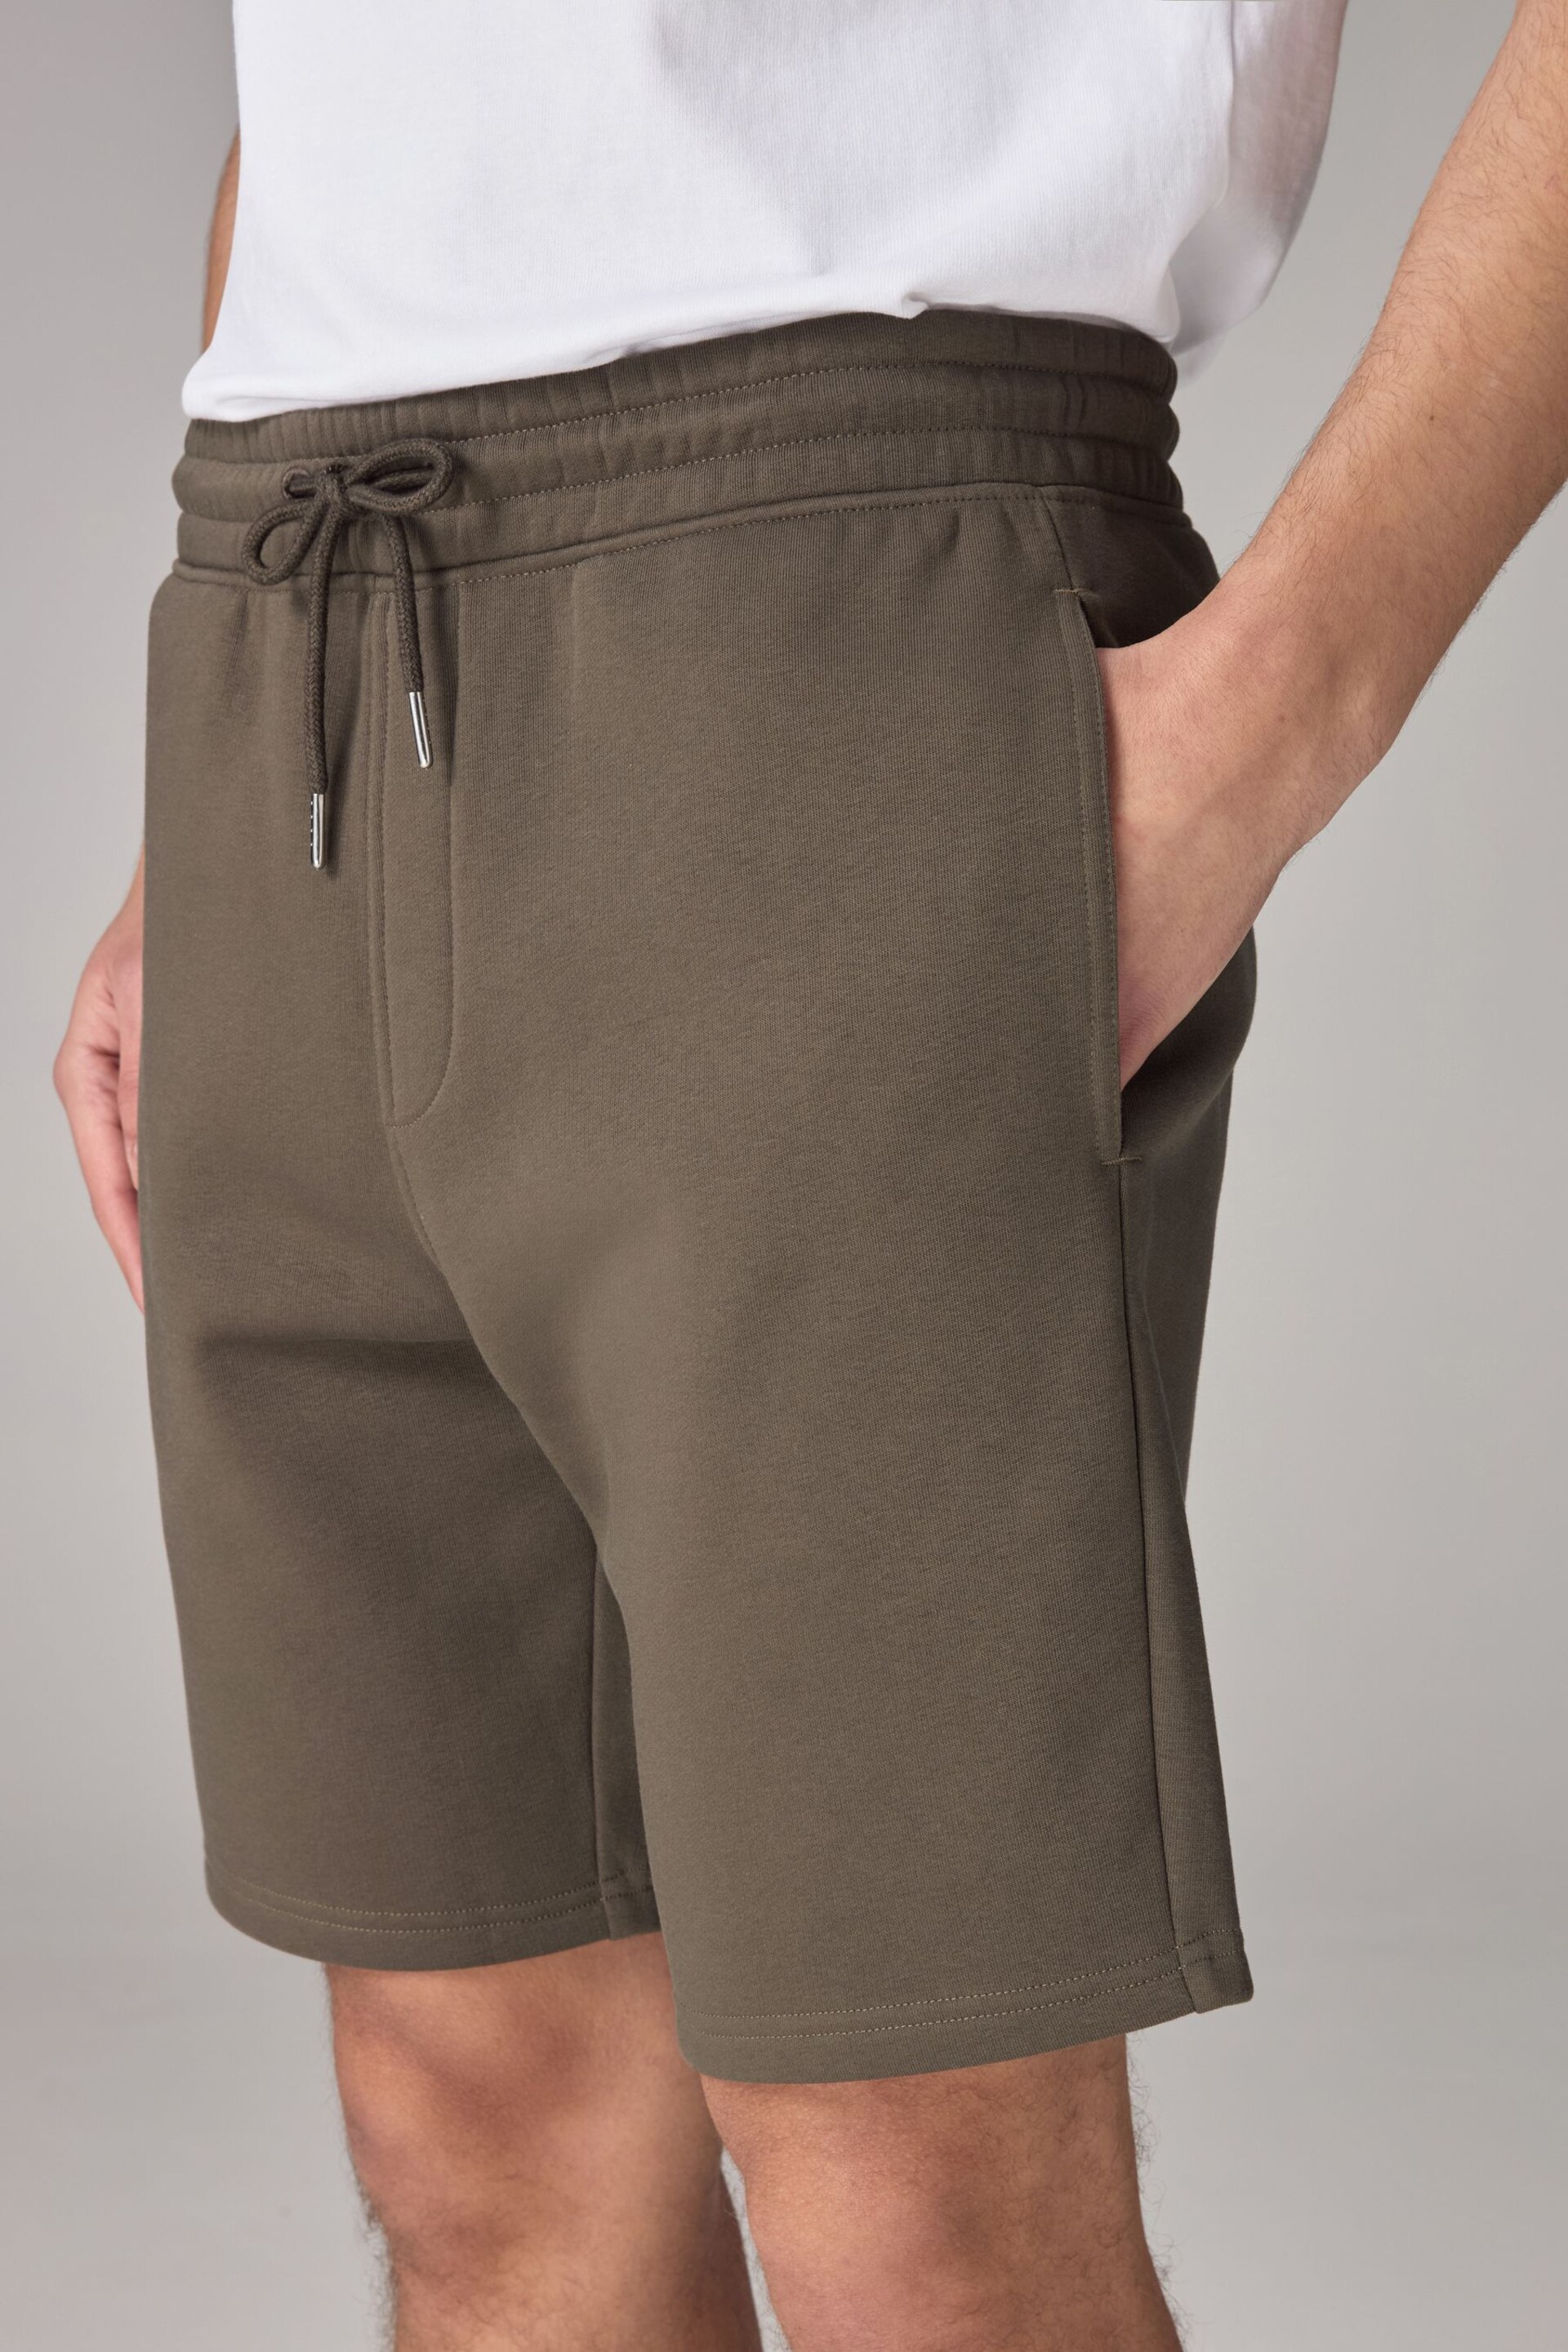 Brown Soft Fabric Jersey Shorts - Image 4 of 8